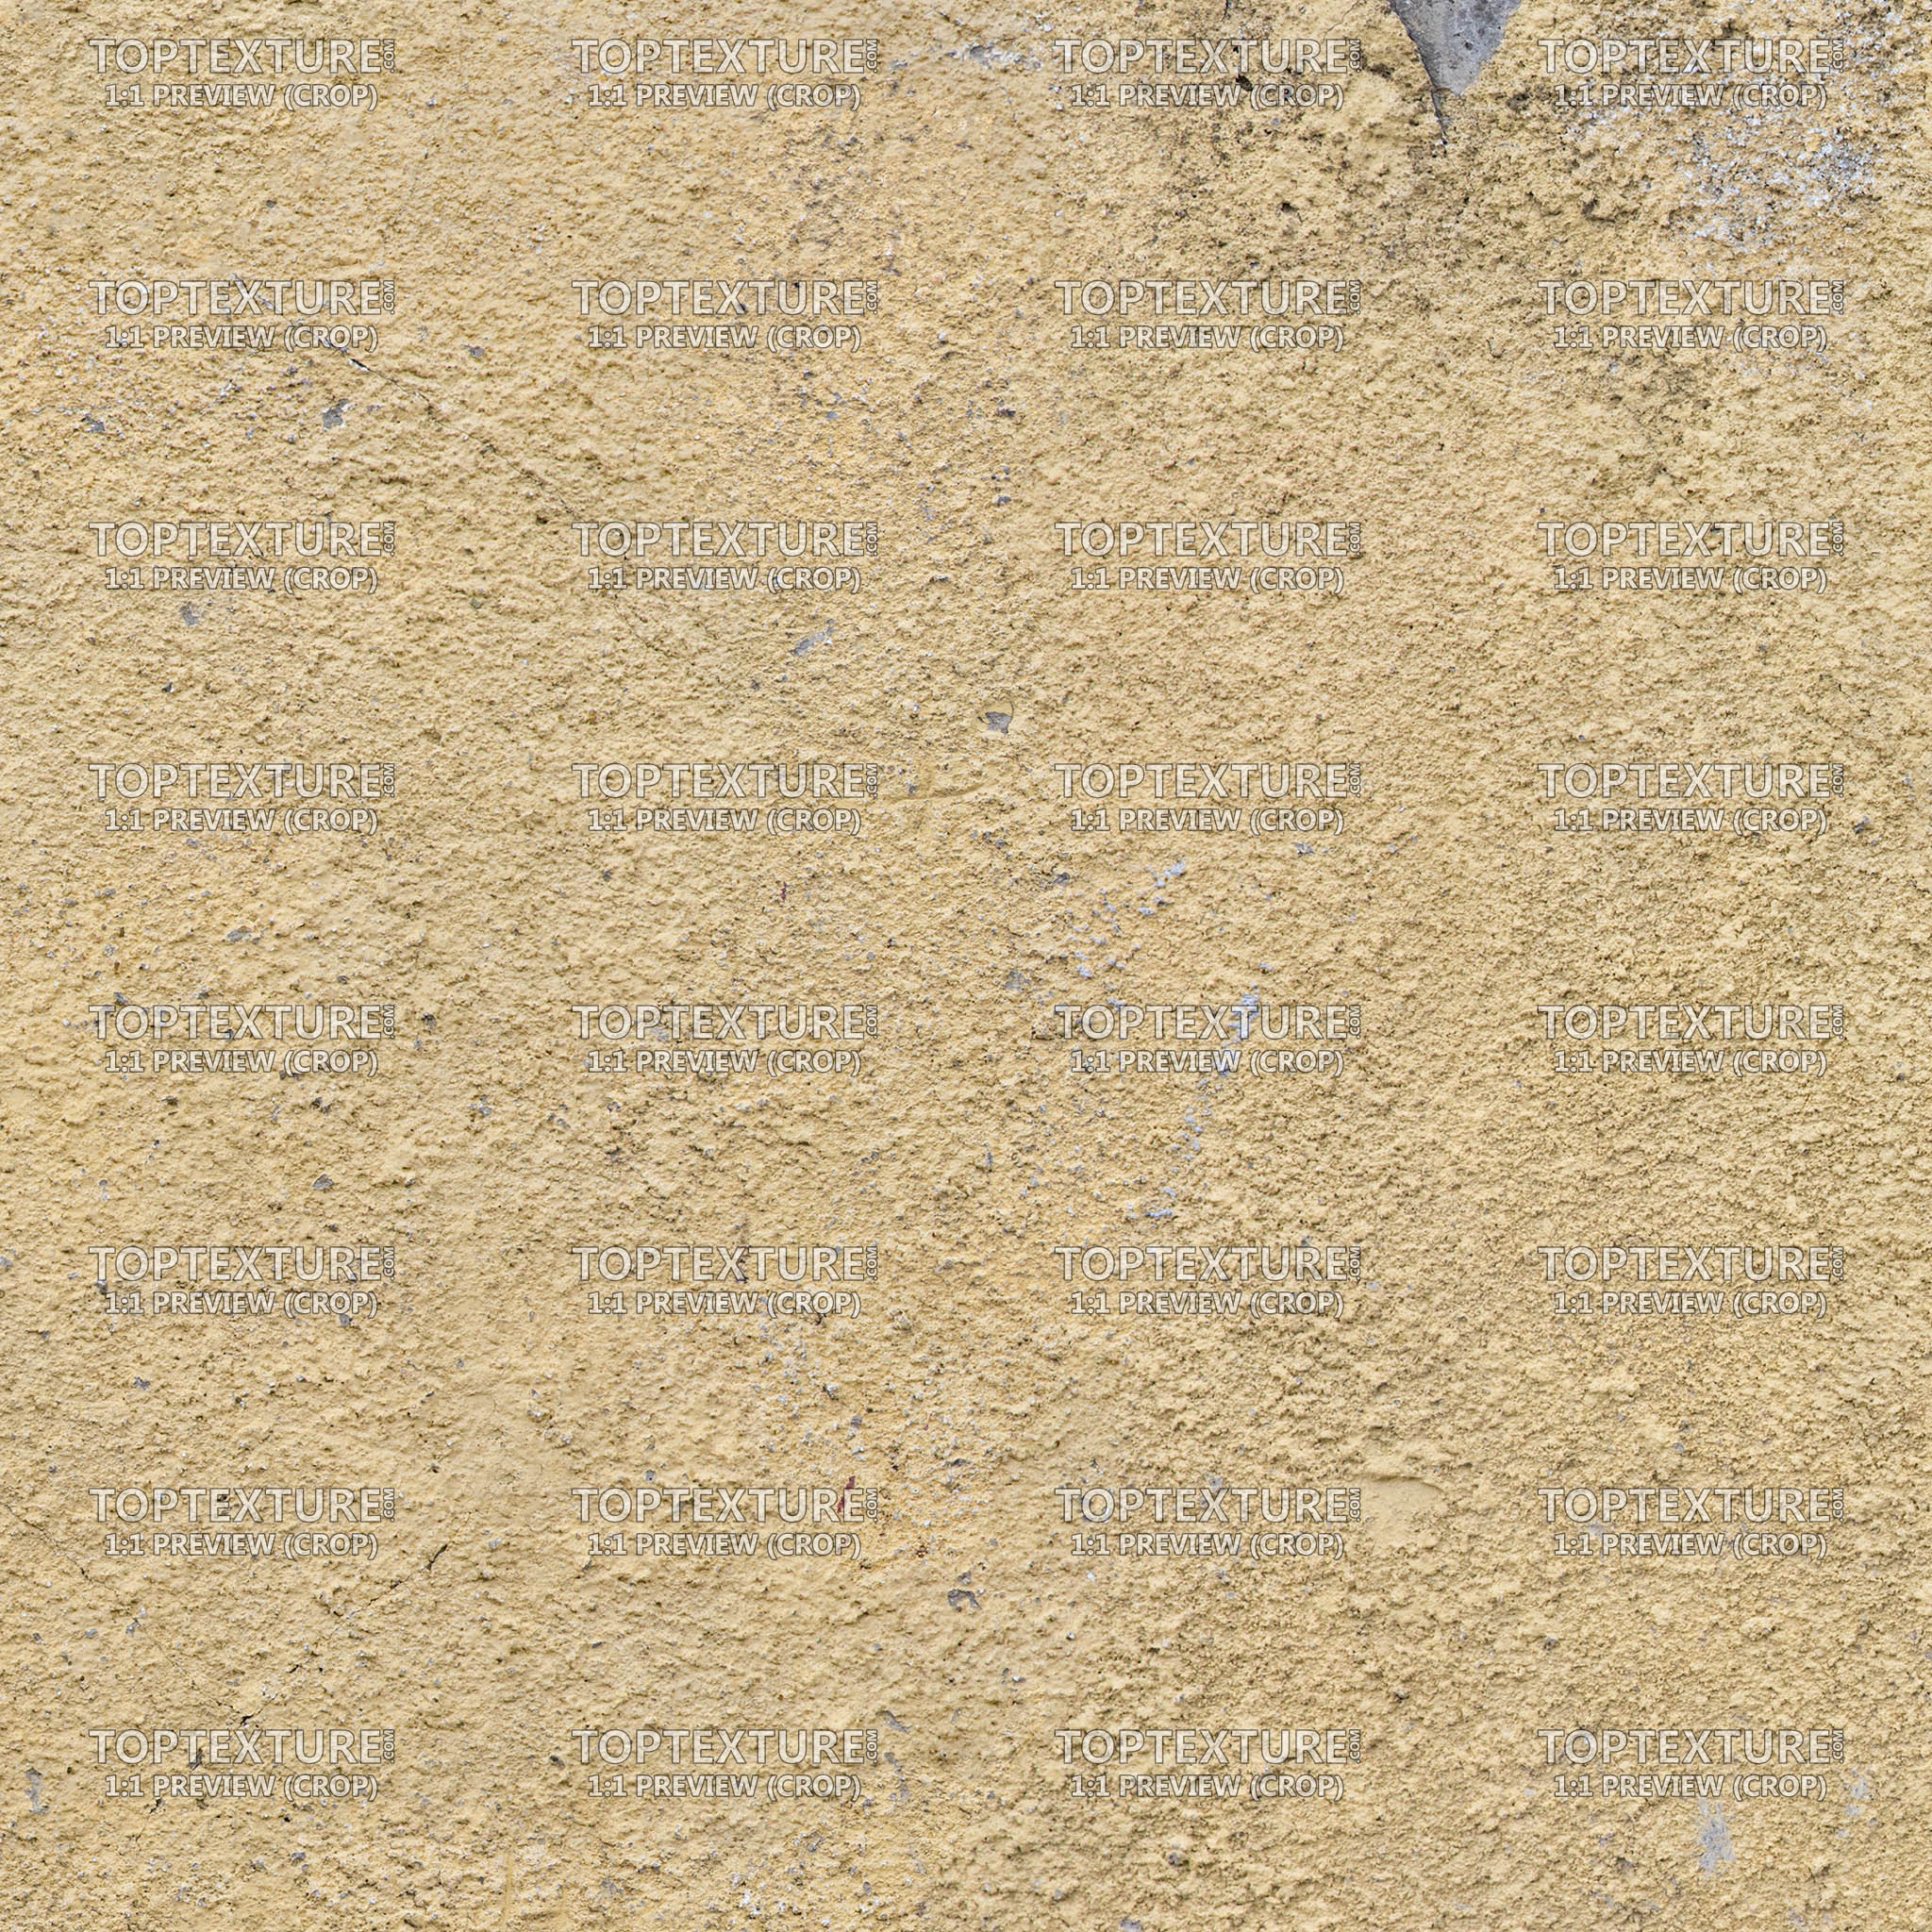 Peeled Top Yellow Plaster Wall - 100% zoom